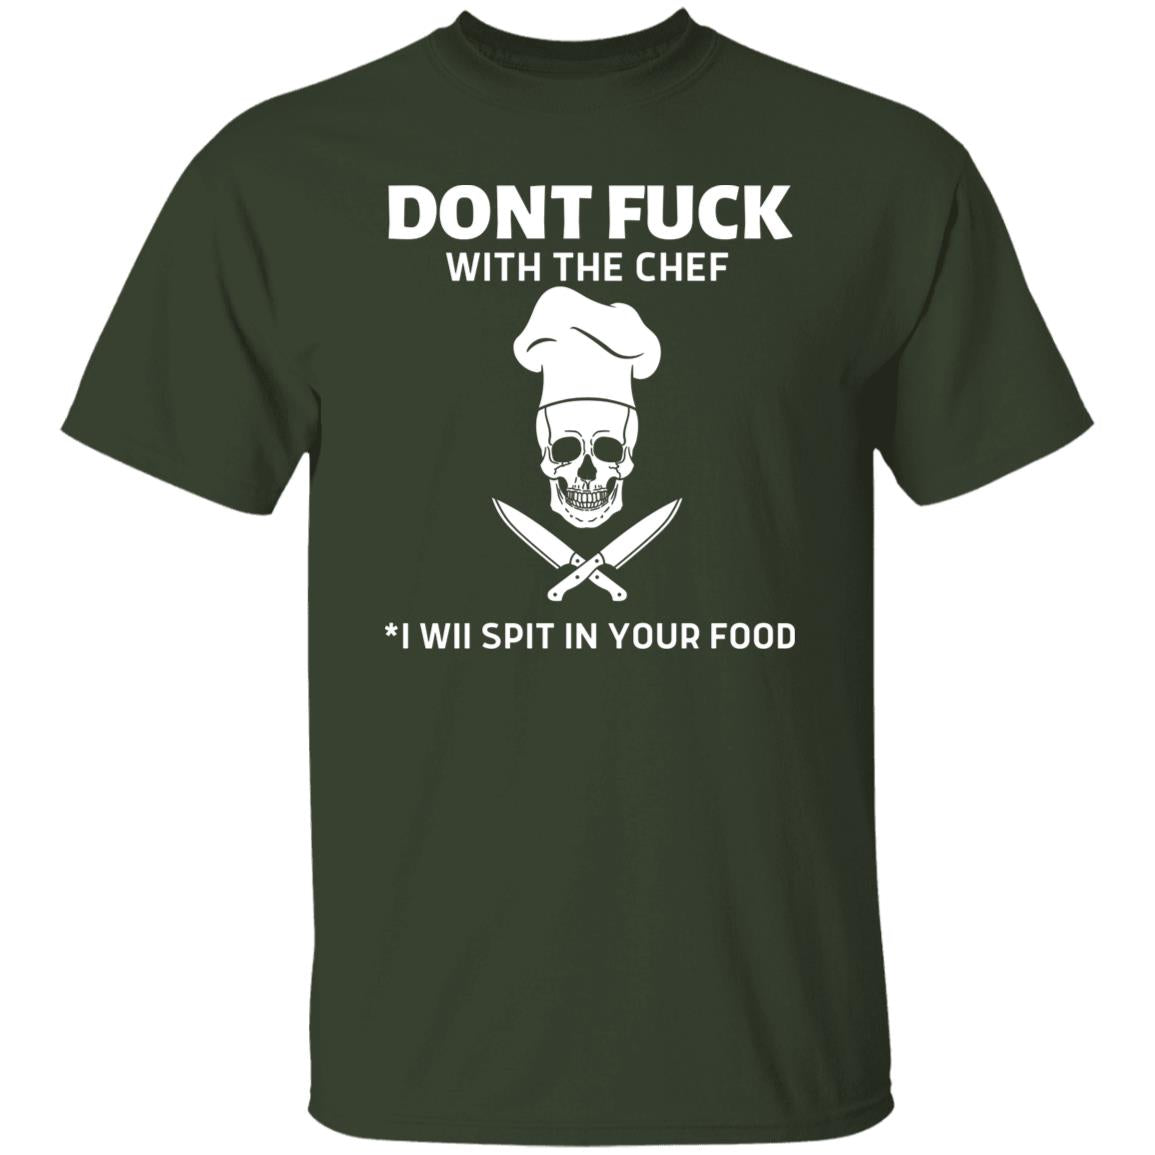 Don't Mess With The Chef T-Shirt, Funny Sarcastic Chef Home Cook Grilling Shirt, Weekend Grill BBQ T-shirt